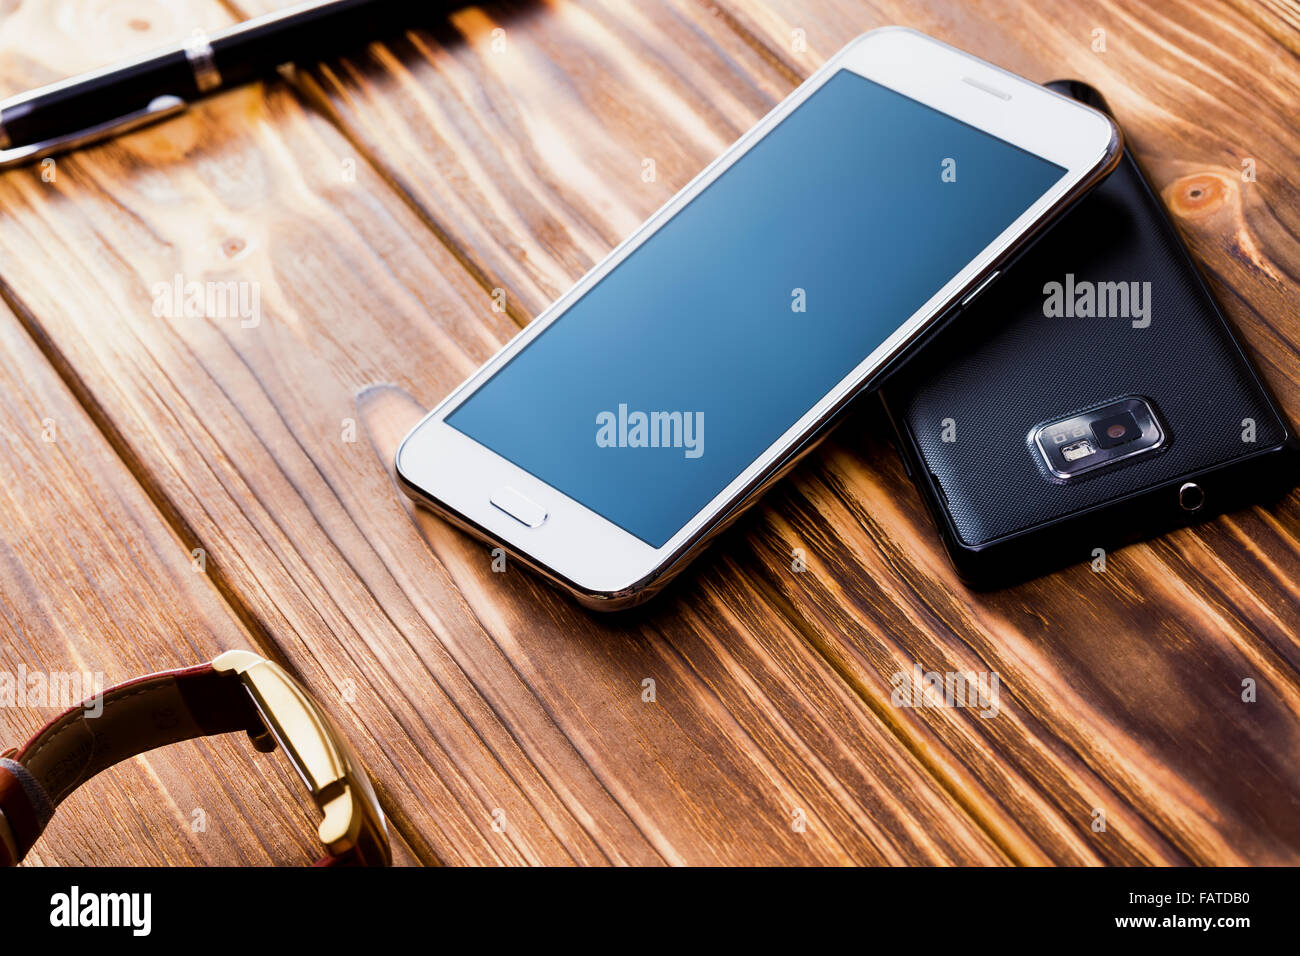 white and black mobile phones on the wooden background. Stock Photo